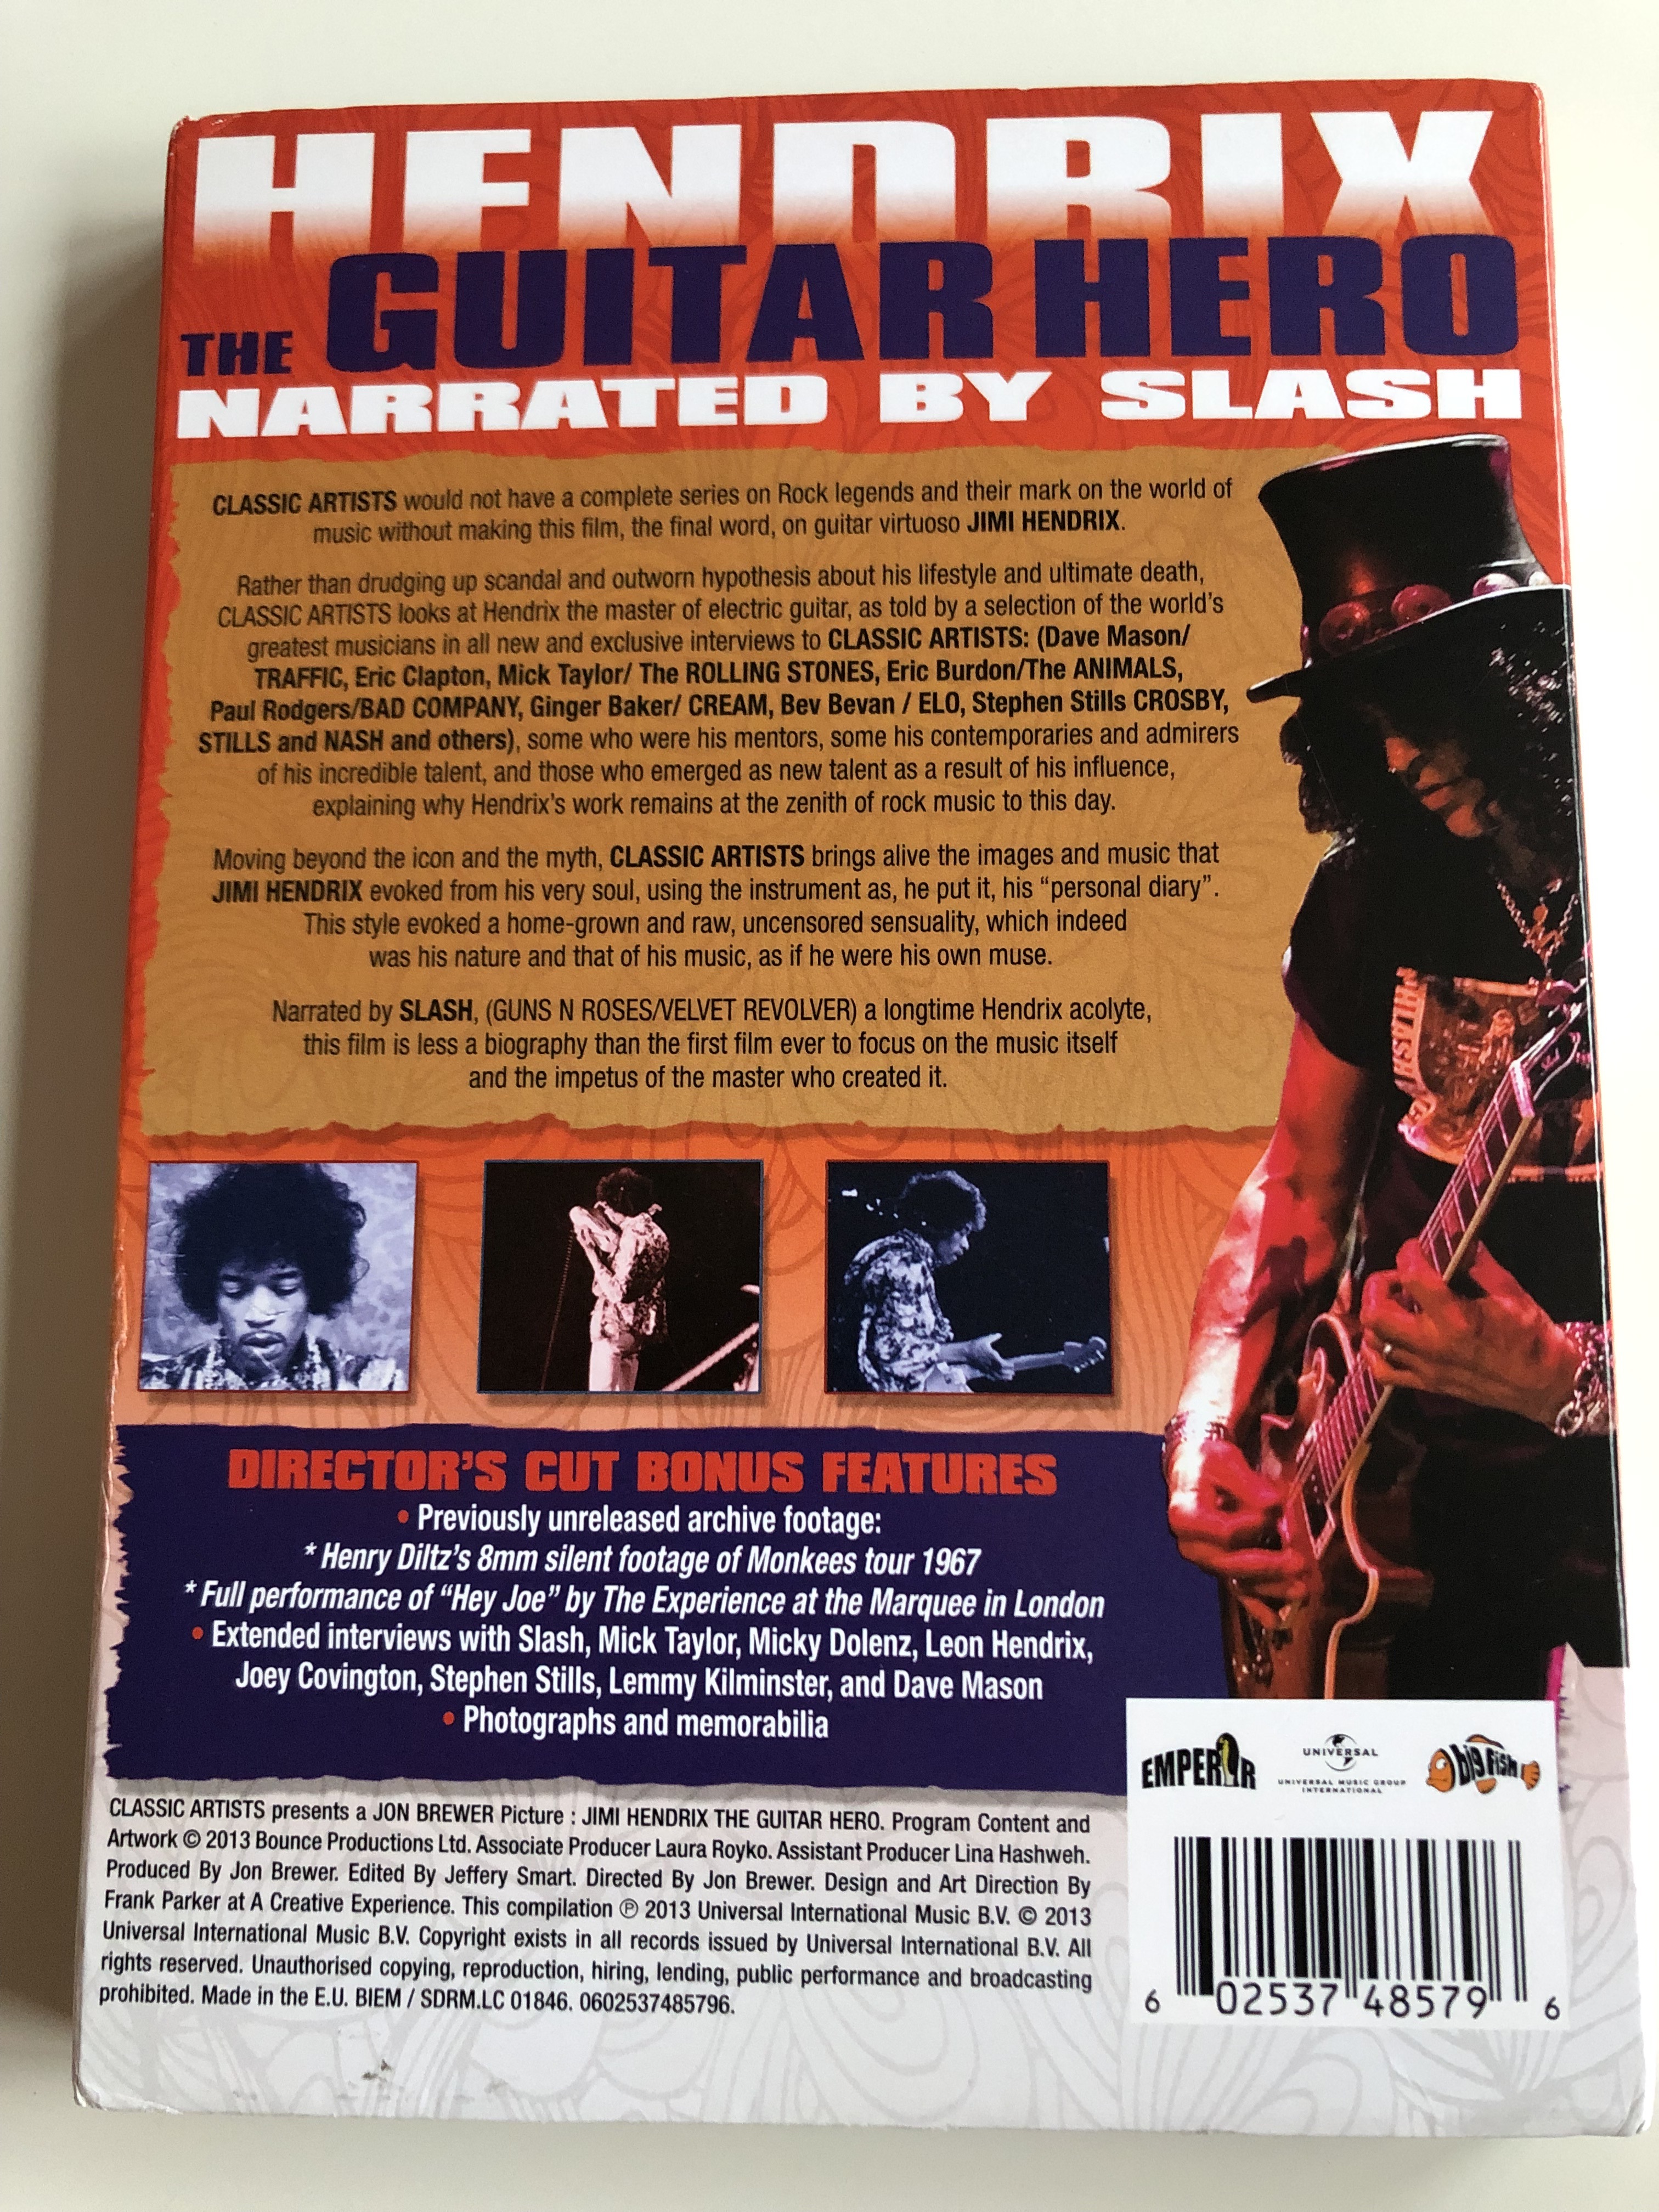 jimi-hendrix-the-guitar-hero-dvd-2013-celebrated-by-legends-of-rock-directed-by-jon-brewer-narrated-by-slash-director-s-cut-2-dvd-set-including-5-hrs-of-bonus-features-2-.jpg